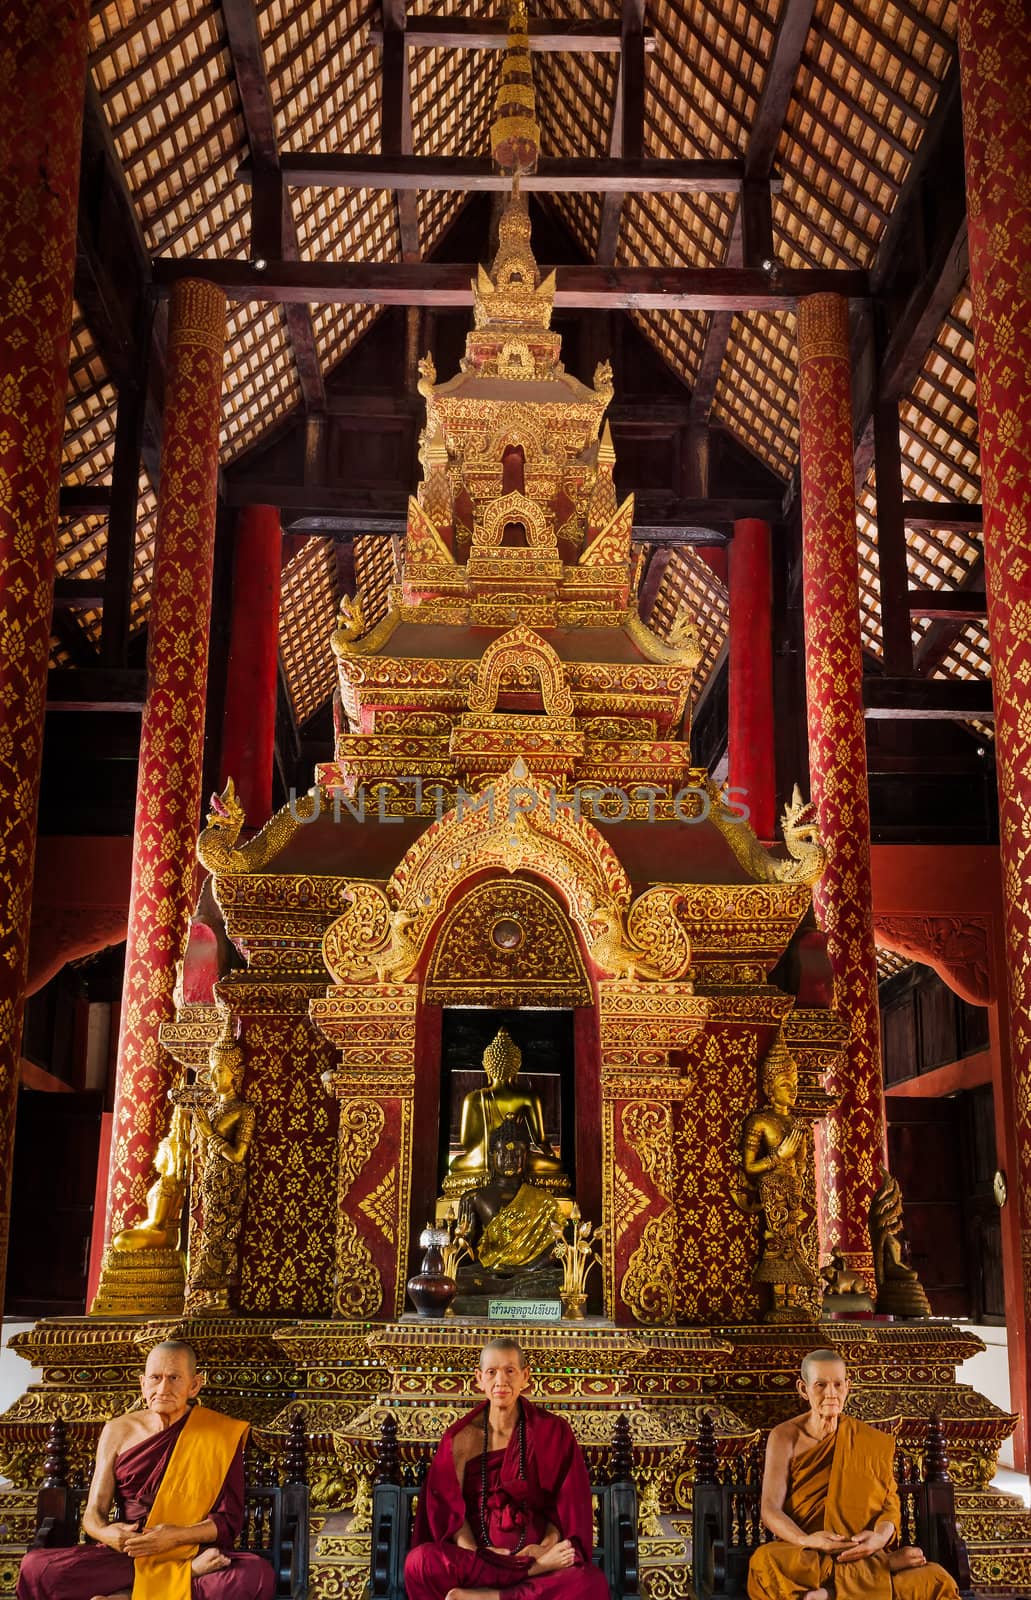 The building houses in church at Phra Singh Temple, Chiang Mai, Northern Thailand